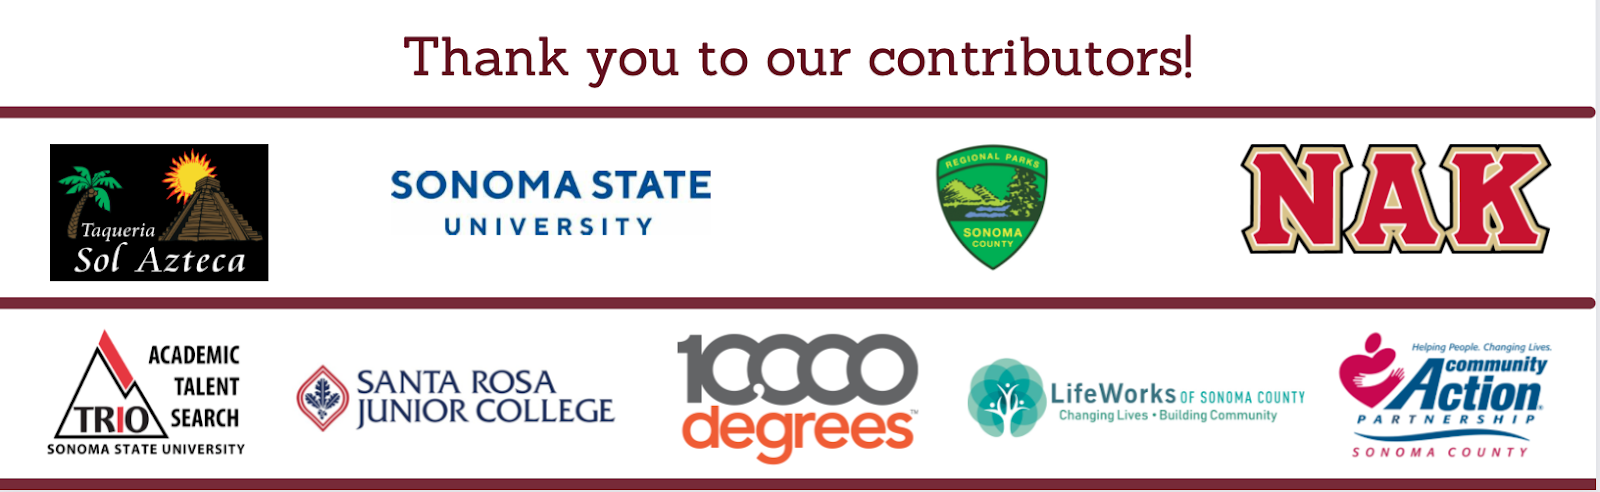 Thank you to our 2023 Sponsors: Sol Azteca, Sonoma State, Sonoma County Regional Parks, NAK, SSU TRIO, Santa Rosa Junior College, 10,000 Degrees, Lifeworks Sonoma County, and Community Action Partnership Sonoma County